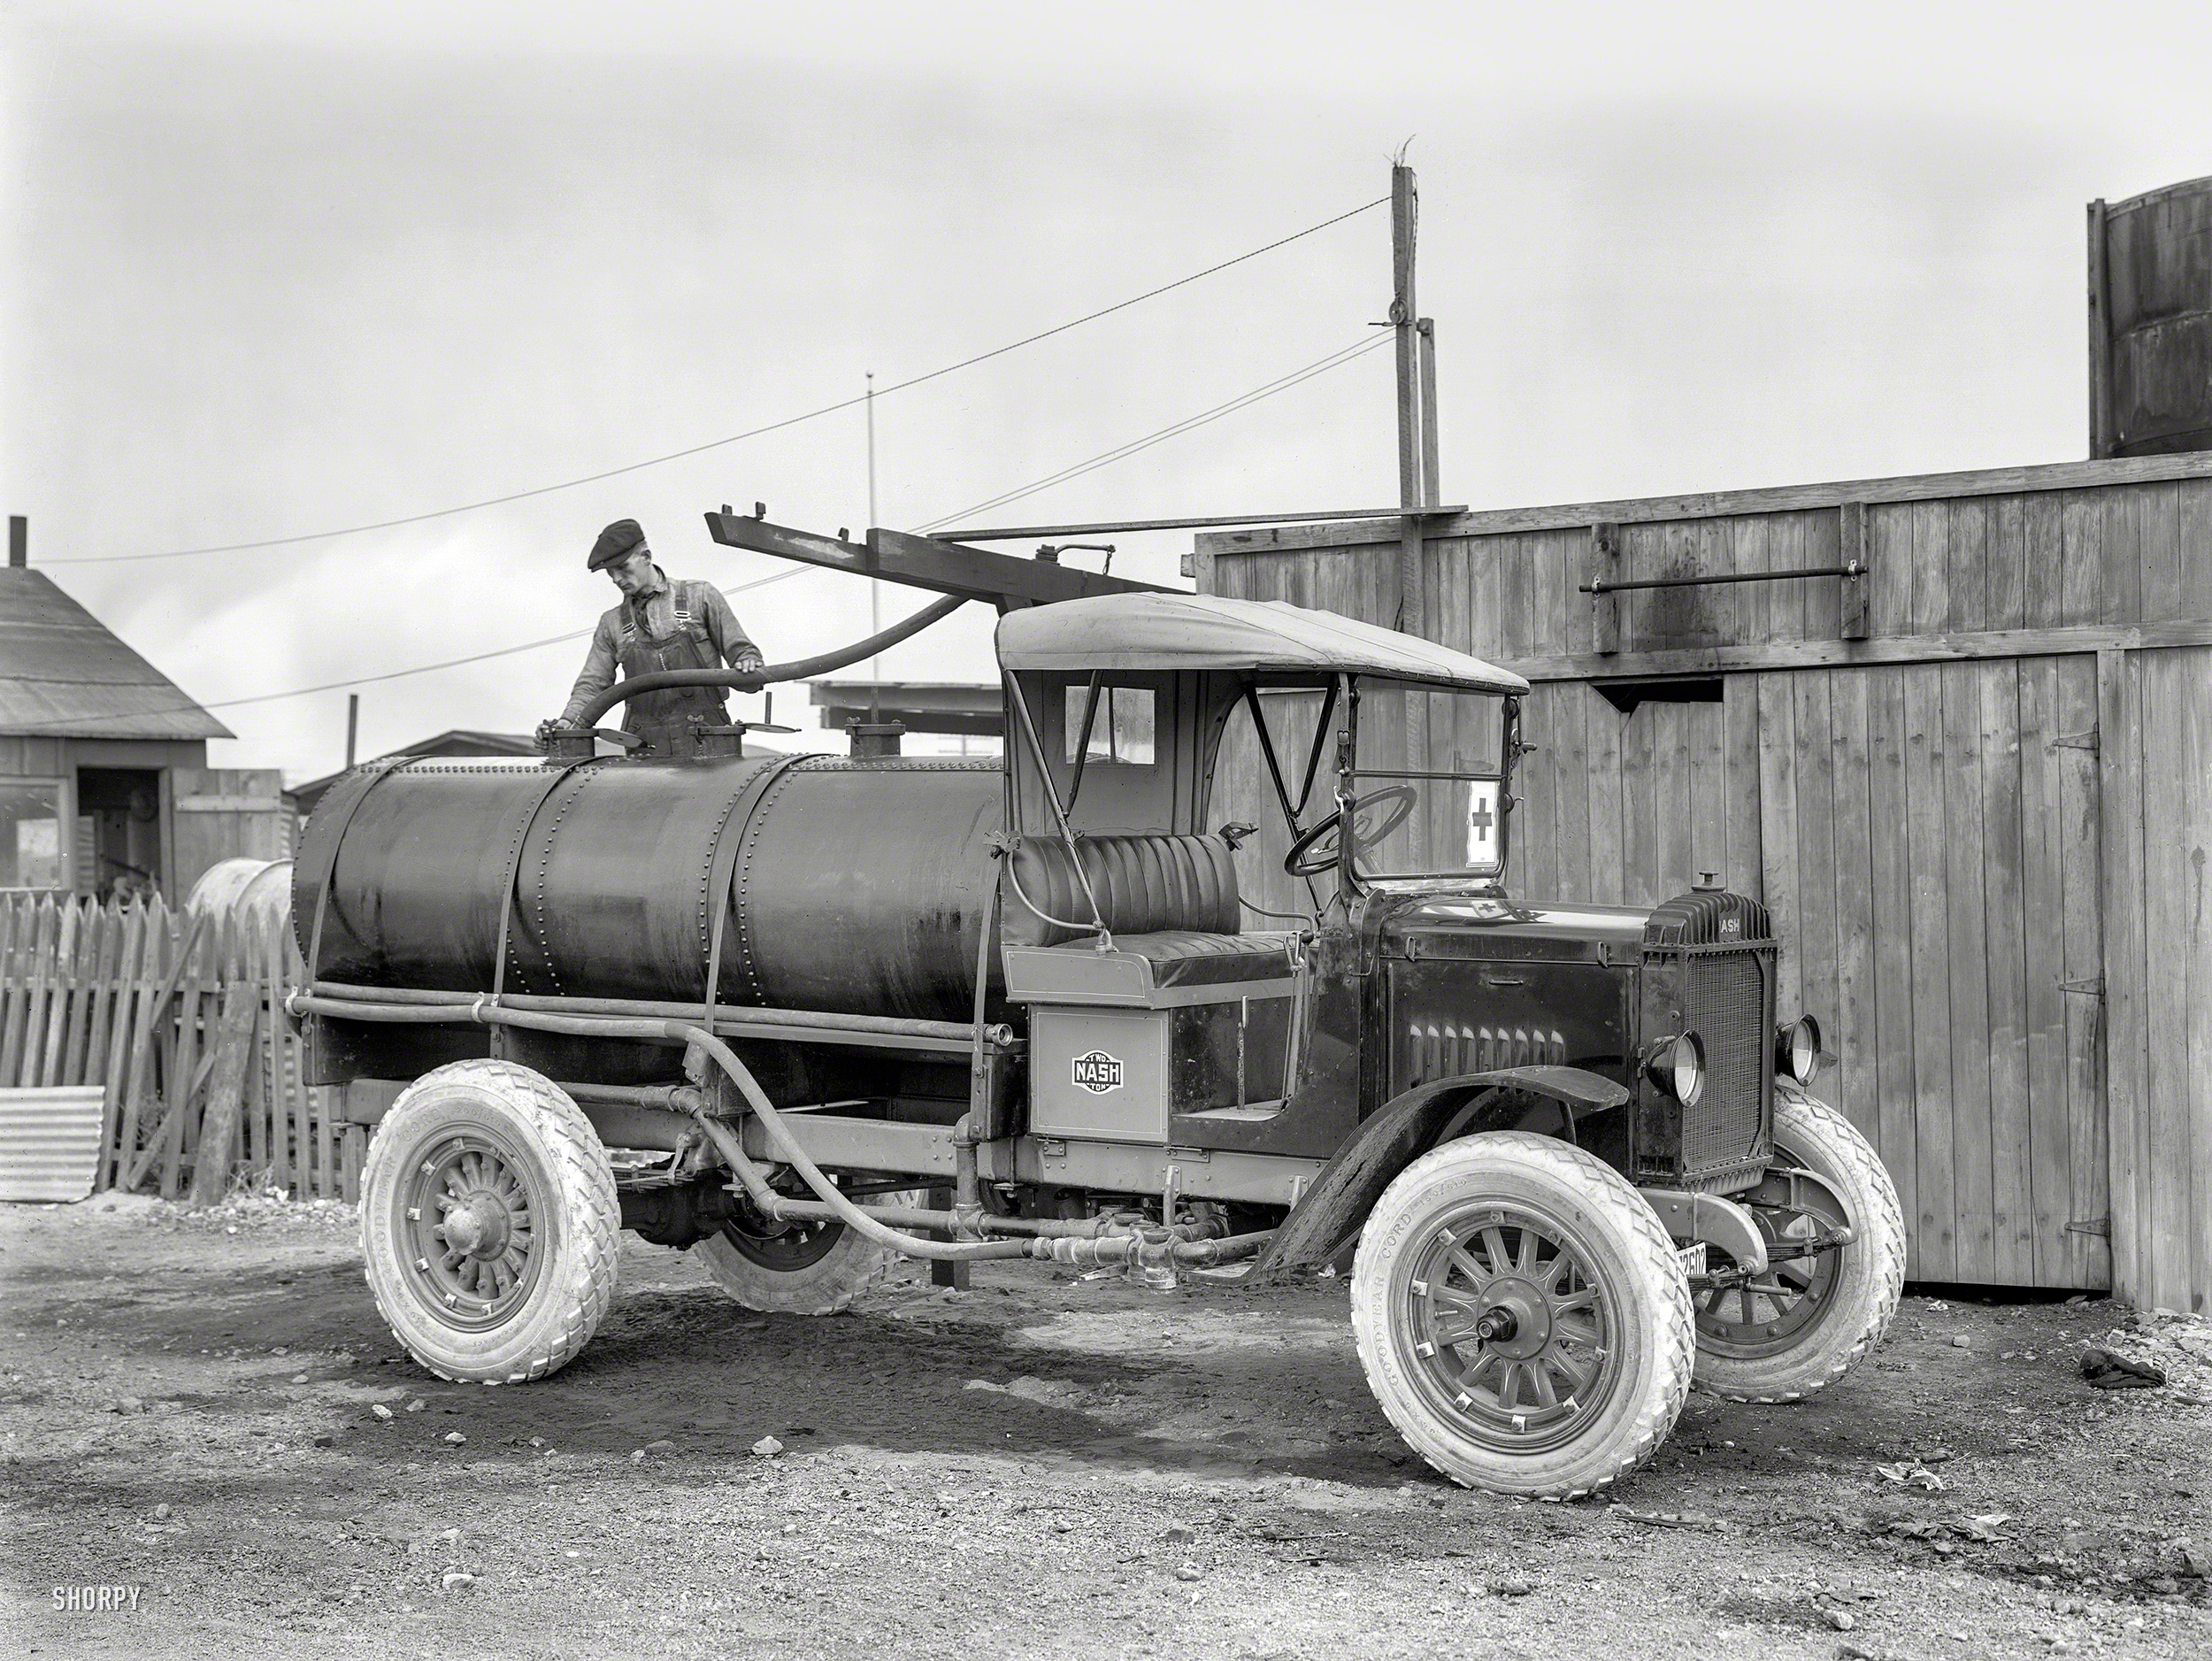 &nbsp; &nbsp; &nbsp; &nbsp; The flushing of streets by sprinkler trucks was a widespread if not terribly effective public-health measure during the "Spanish influenza" epidemic of the late teens.
San Francisco circa 1919. "Nash Two-Ton Tanker Truck." This begins a new series of photos, scanned by Shorpy from large-format negatives taken by or for Christopher Helin, travel and automotive editor of the San Francisco Examiner from about 1915 to 1930. 8.5 x 6.5 inch glass plate. View full size.